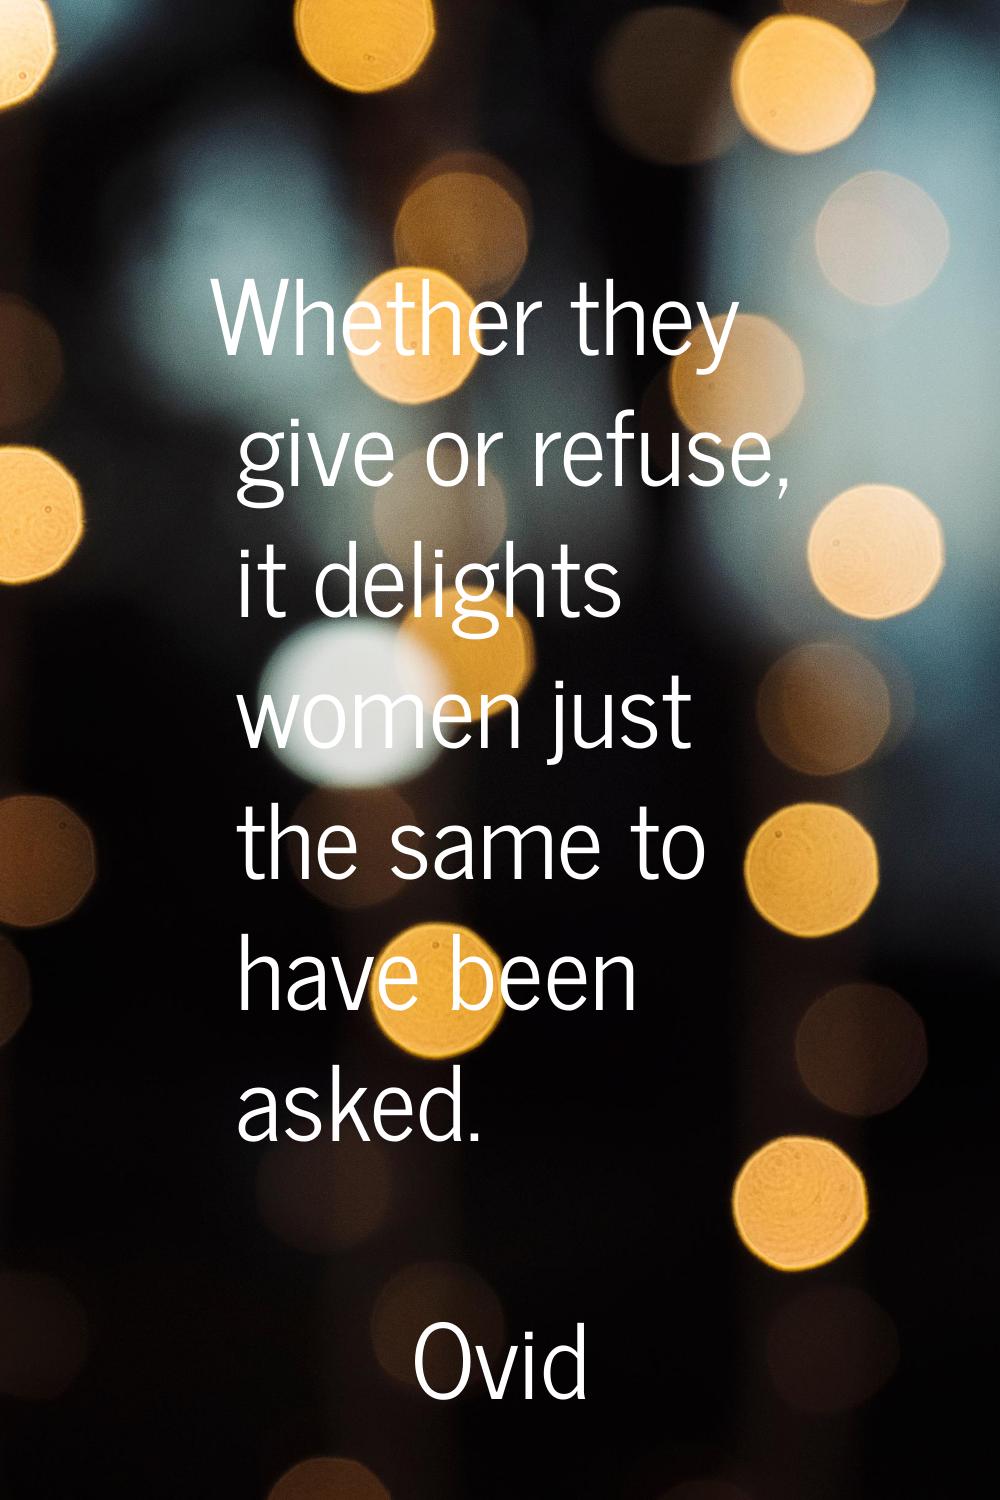 Whether they give or refuse, it delights women just the same to have been asked.